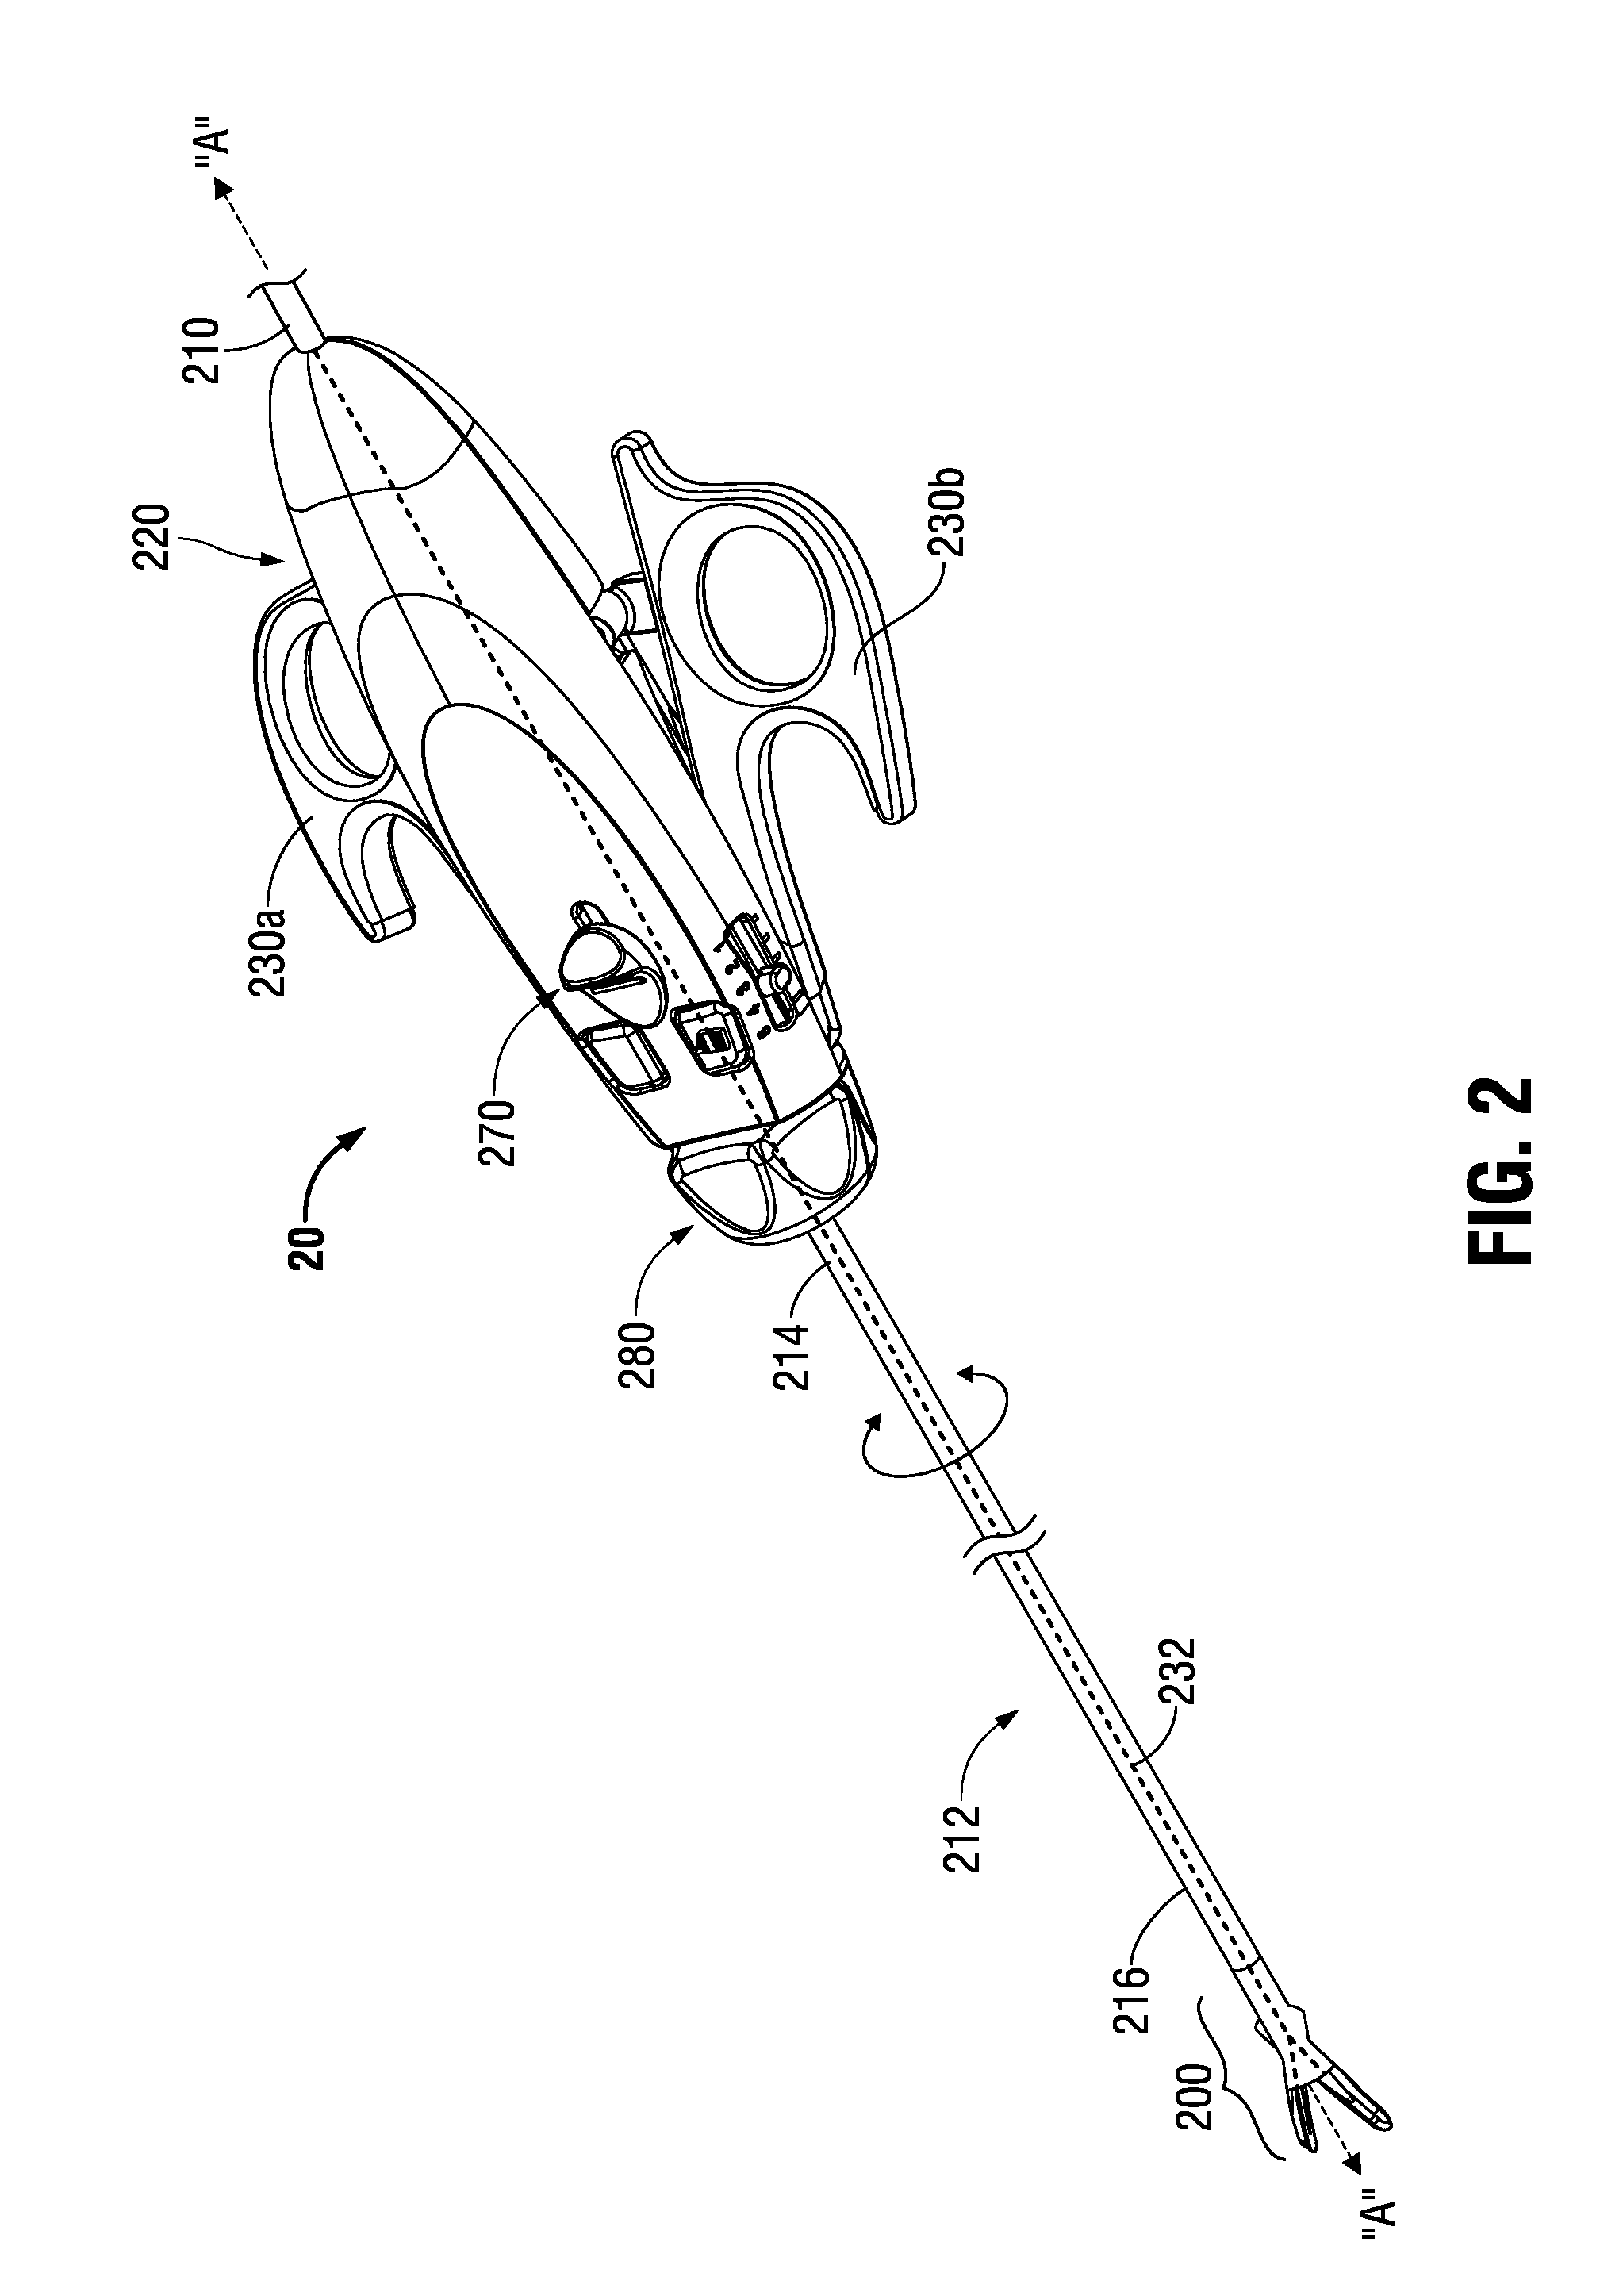 Surgical instruments including nerve stimulator apparatus for use in the detection of nerves in tissue and methods of directing energy to tissue using same